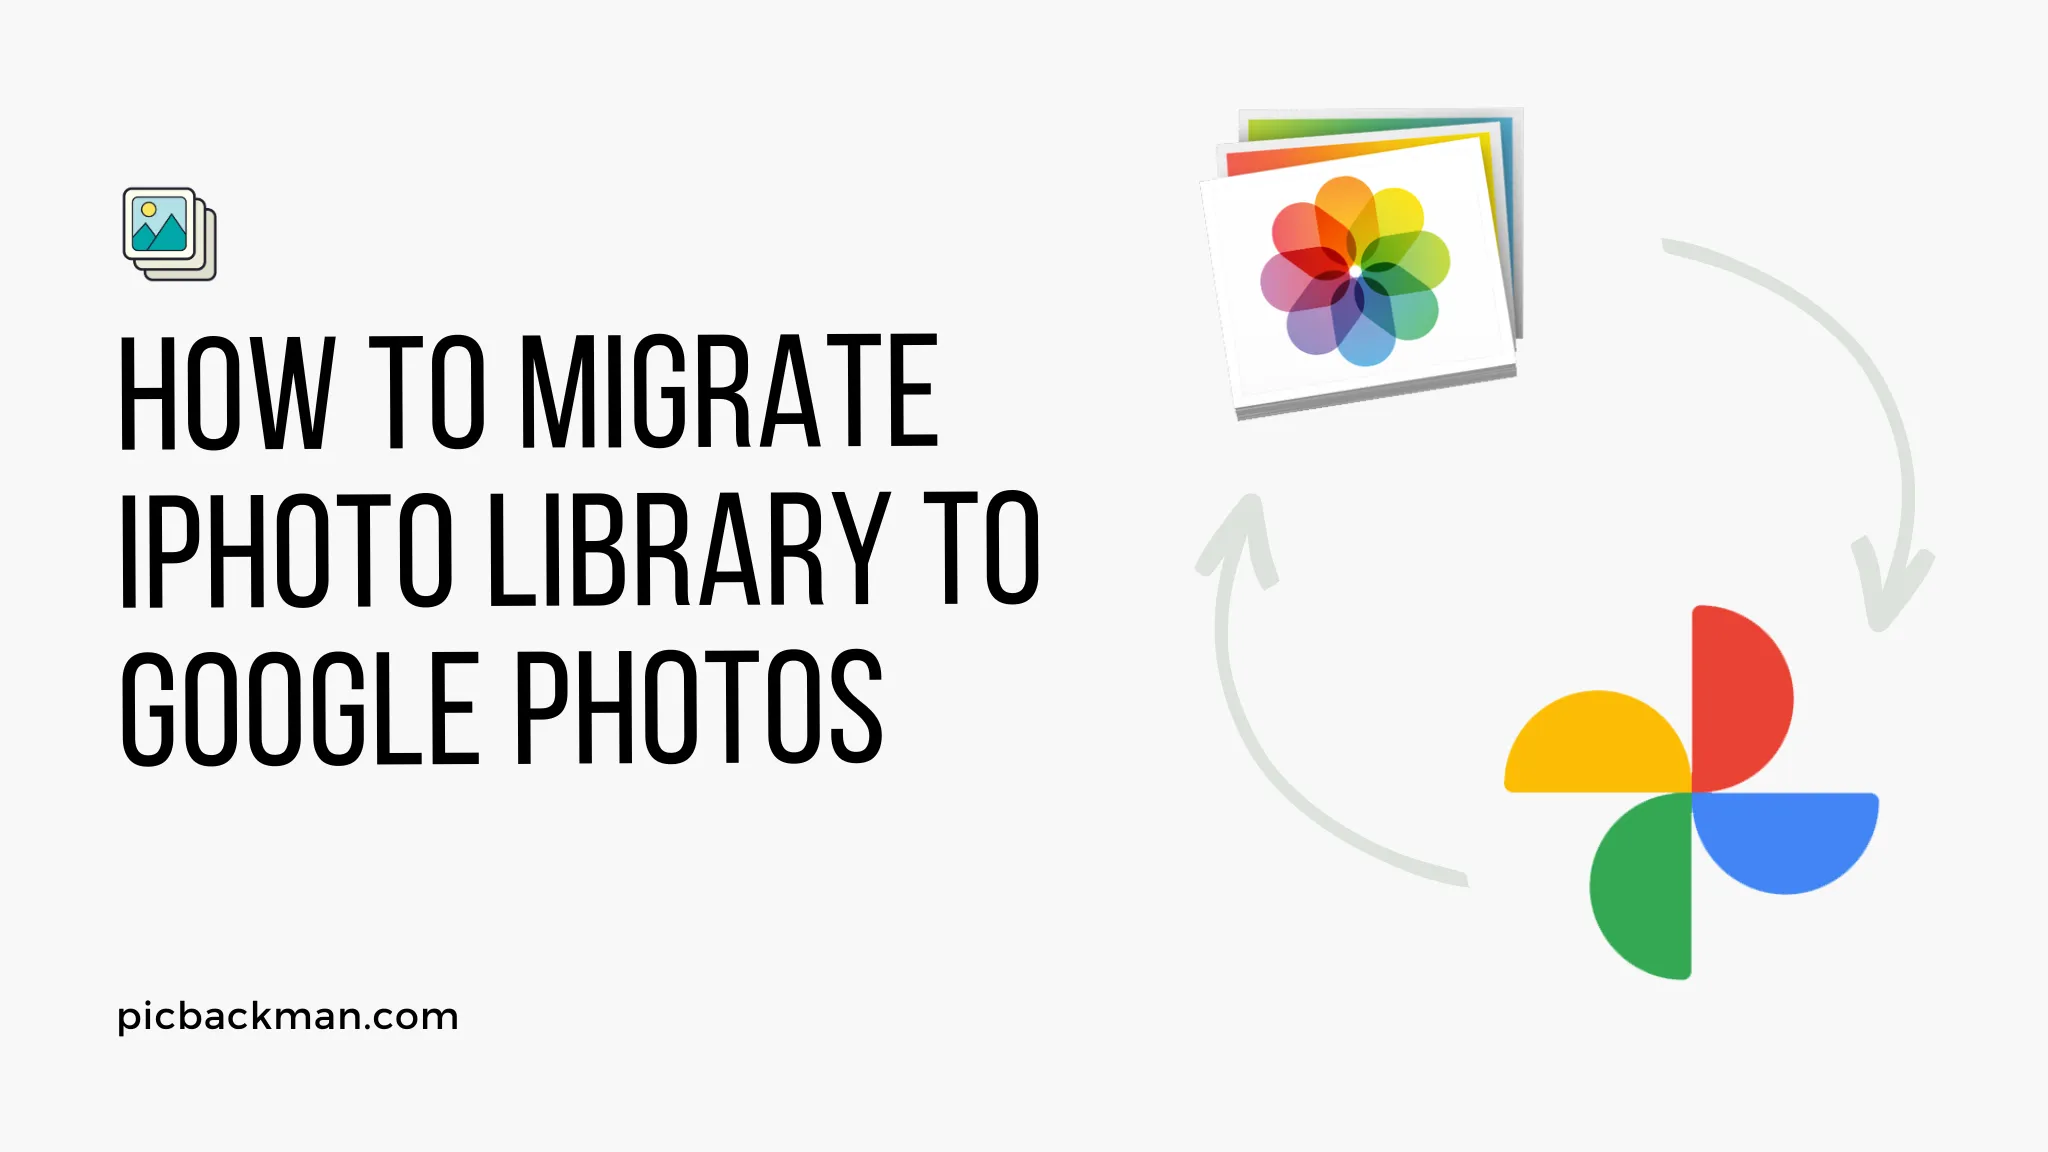 How to Migrate iPhoto Library to Google Photos?